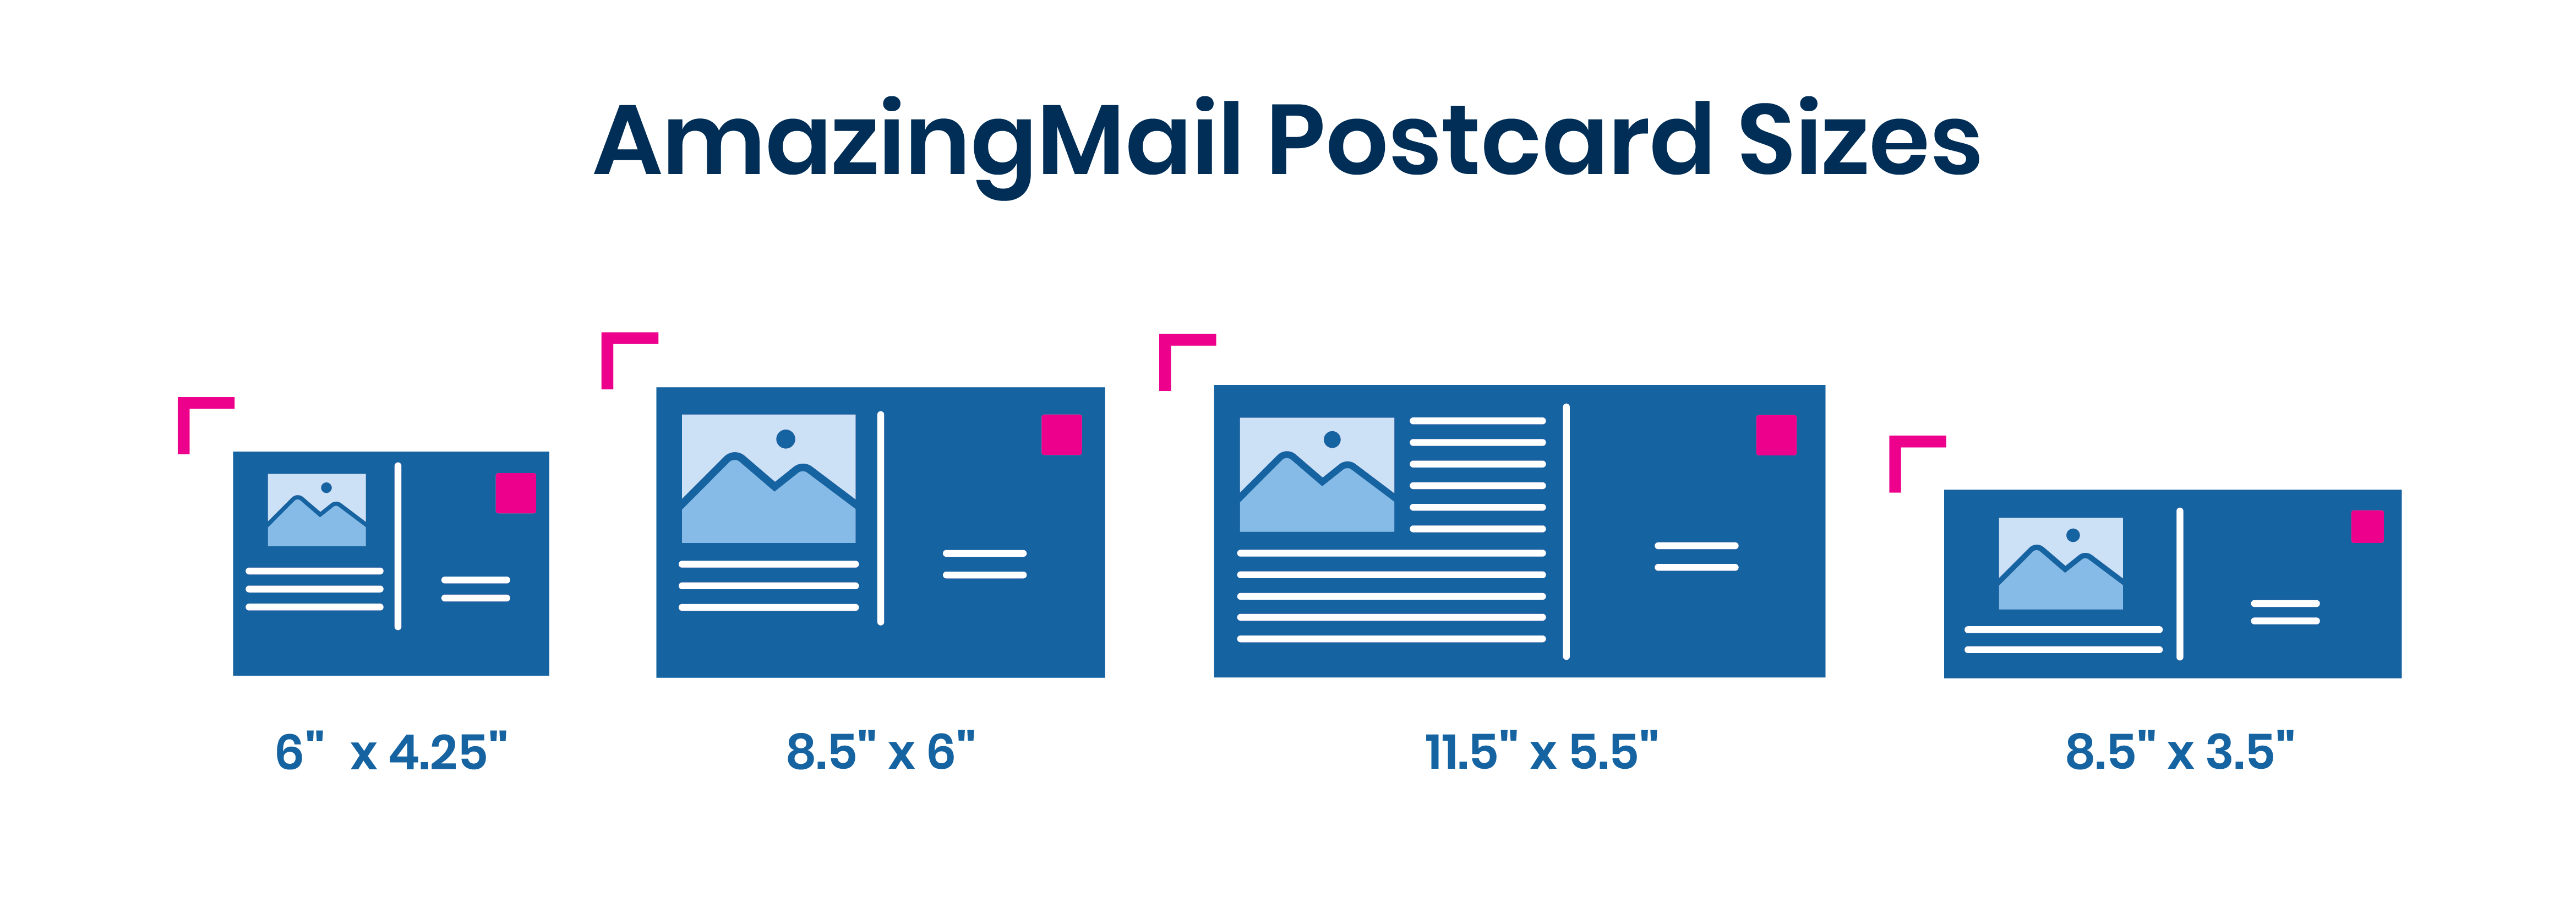 postcard dimensions and postcard sizes for postcard campaigns with AmazingMail 